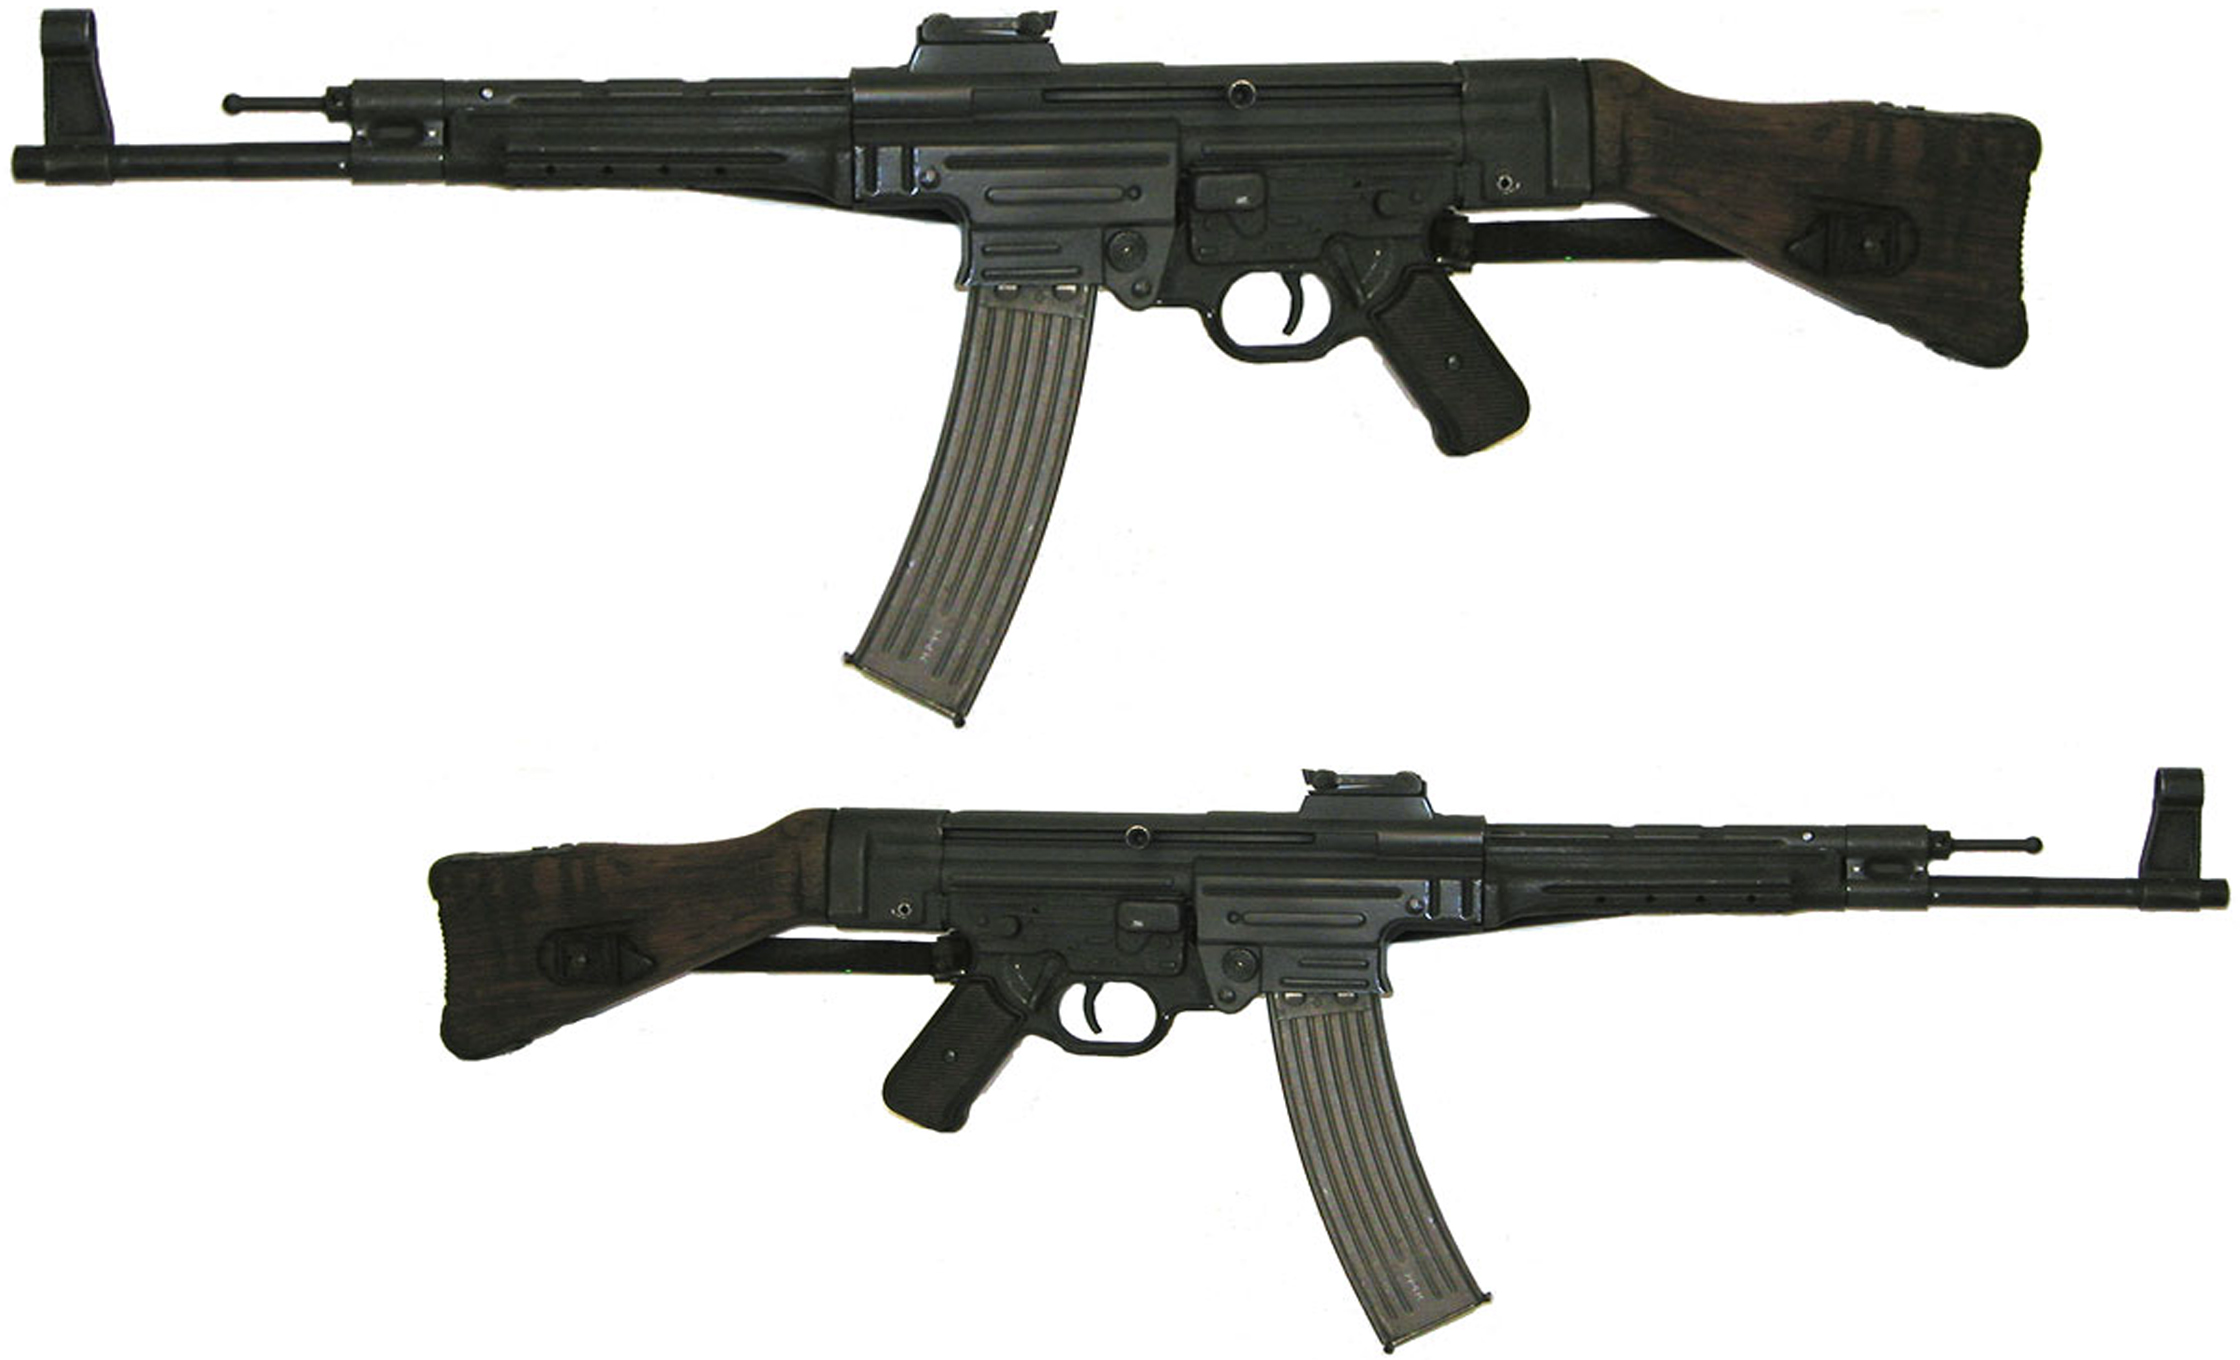 Sturmgewehr 44 Assault Rifle Pics, Weapons Collection